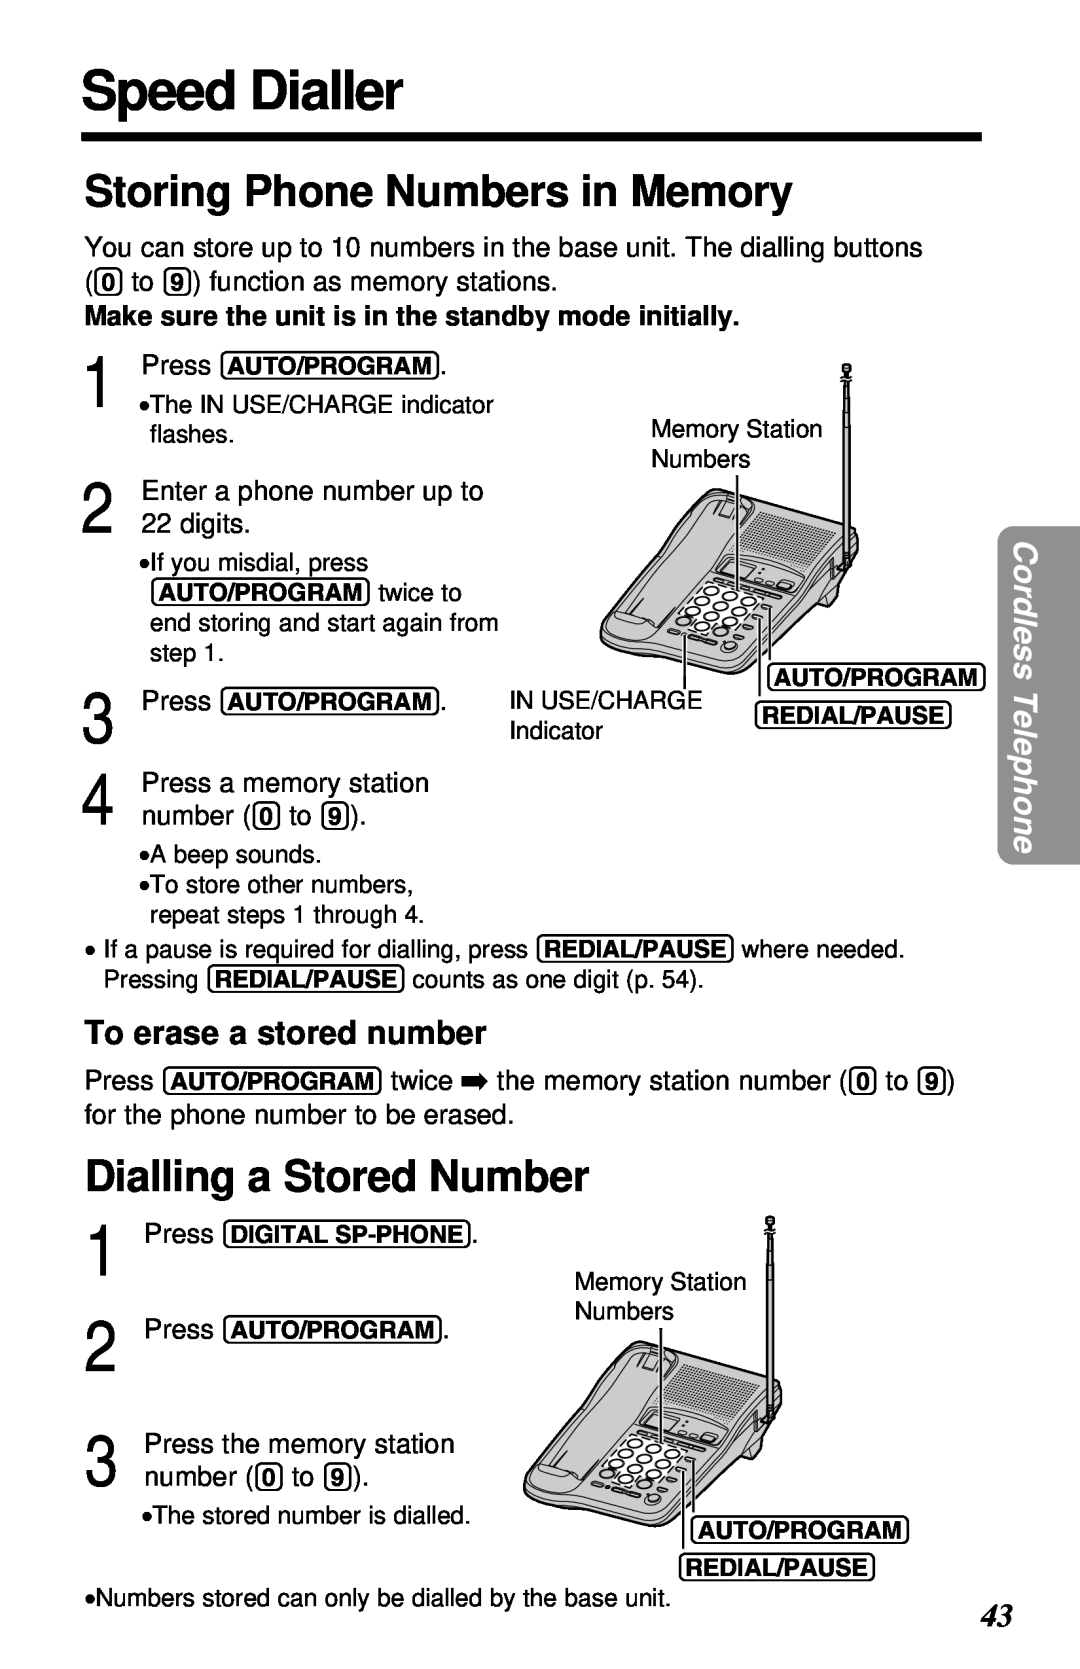 Panasonic KX-TC1230NZW, KX-TC1230ALW Speed Dialler, Storing Phone Numbers in Memory, Dialling a Stored Number 